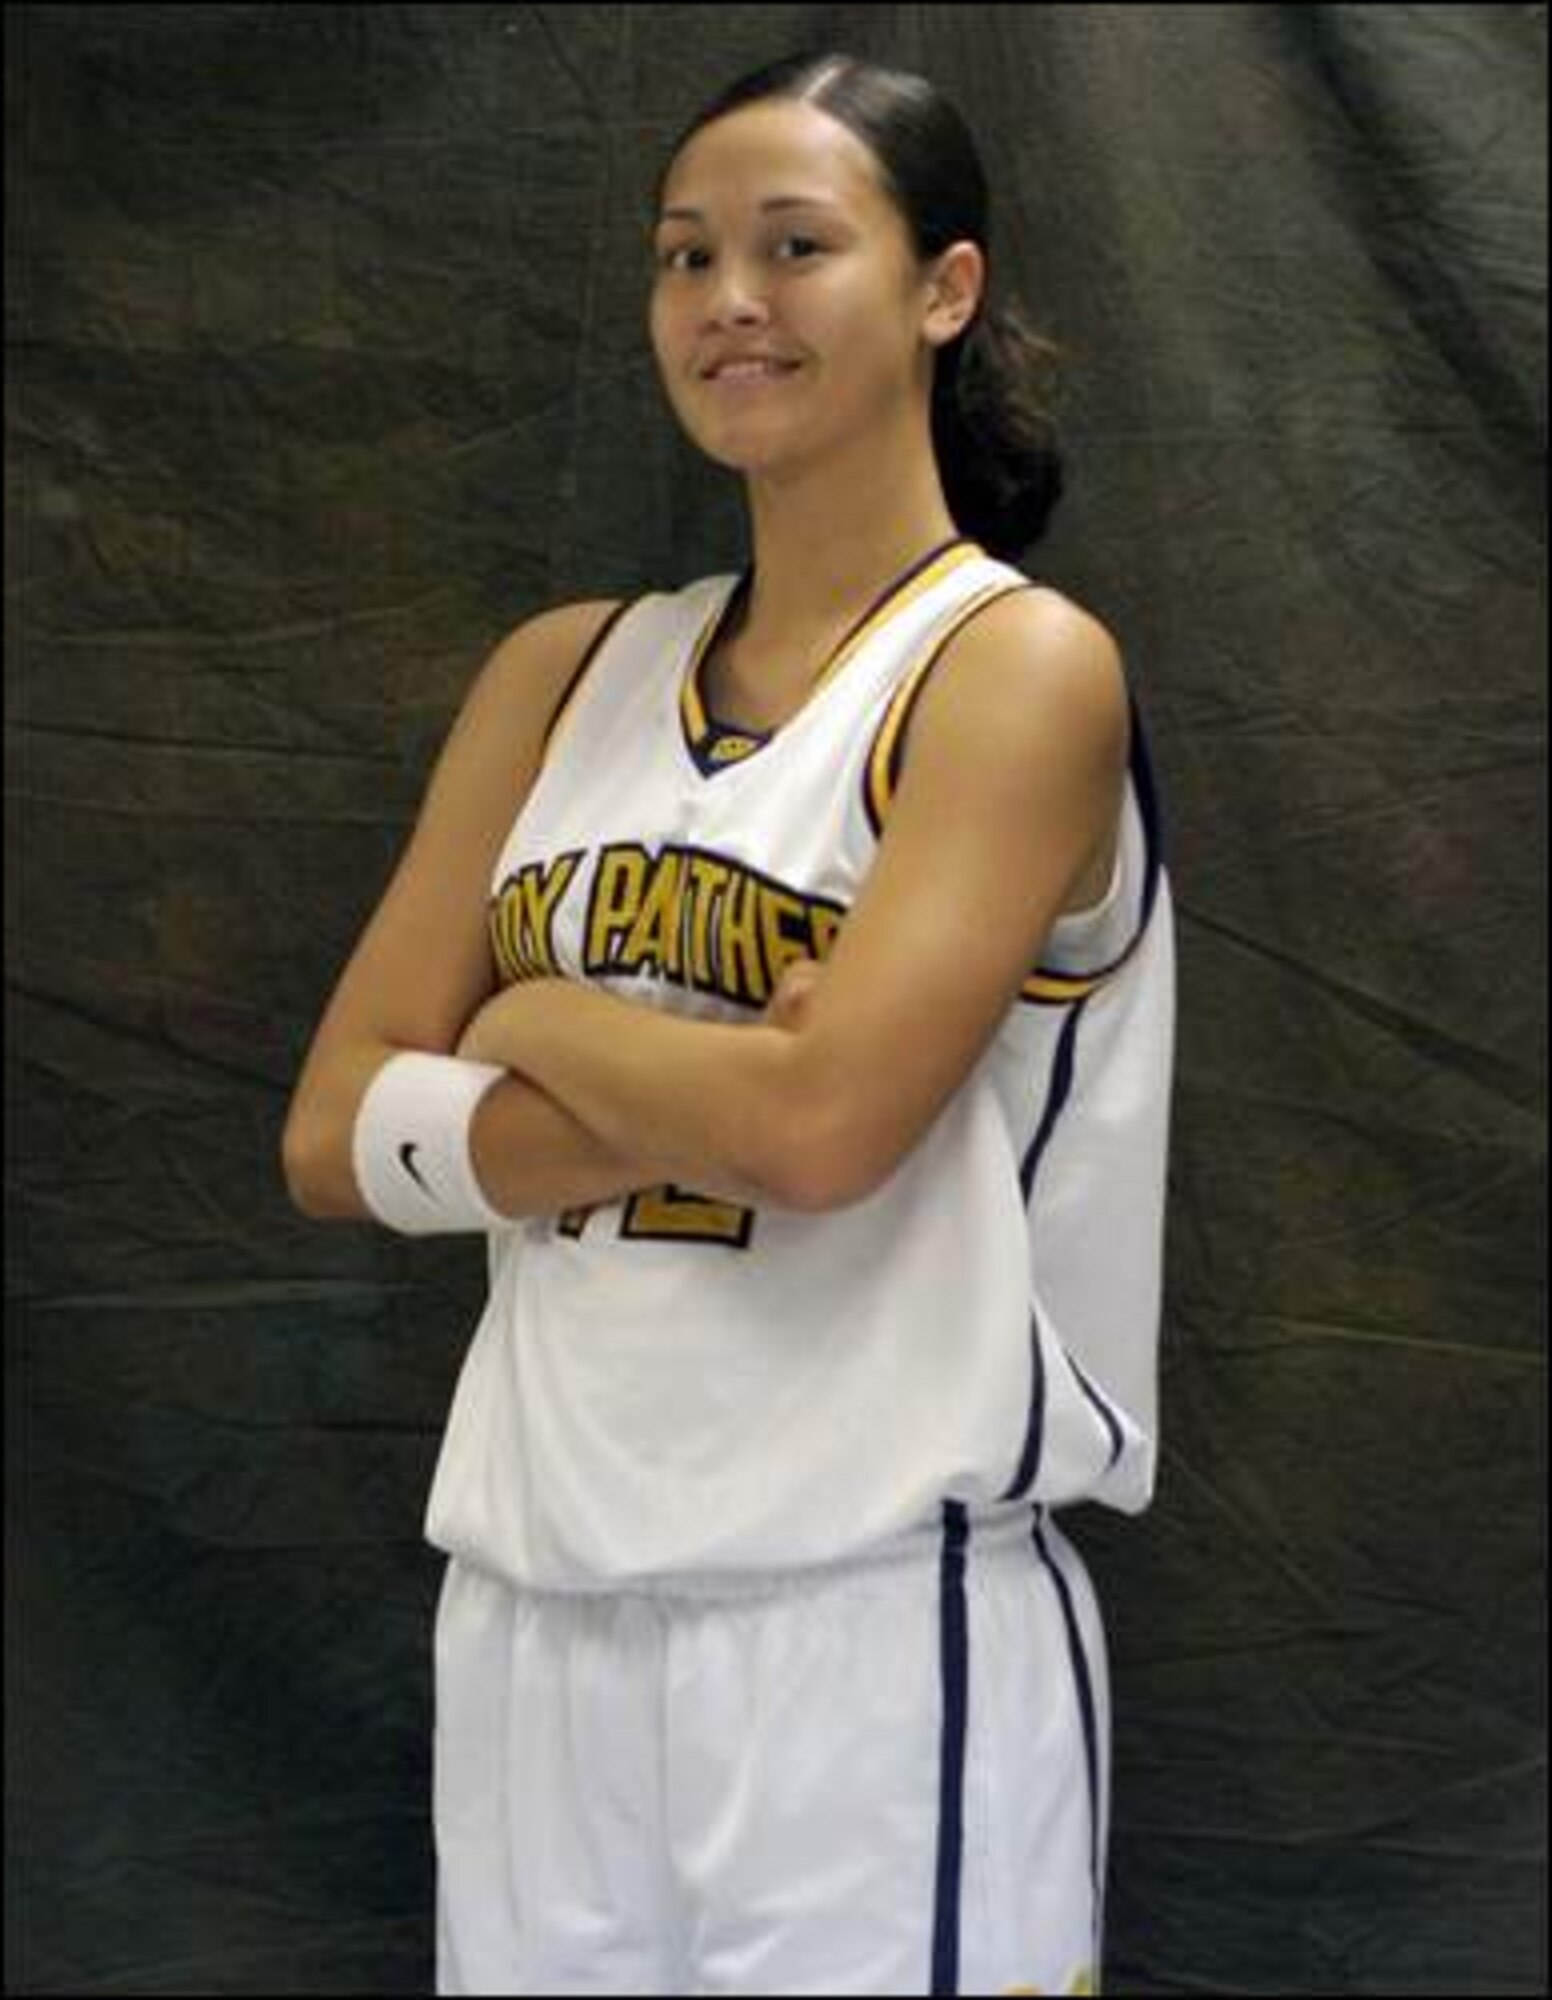 Guam High Panthers' Christina Sheaks was selected to the IIAAG Girls' Basketball League coaches' All-Island first team. (Photo by Eric Palacios/Pacific Daily News)  This photo was published with the permission of the publisher of the Pacific Daily News, Guam. Any republication of this photo without the explicit permission of the Pacific Daily News is in violation of federal copyright laws.
             